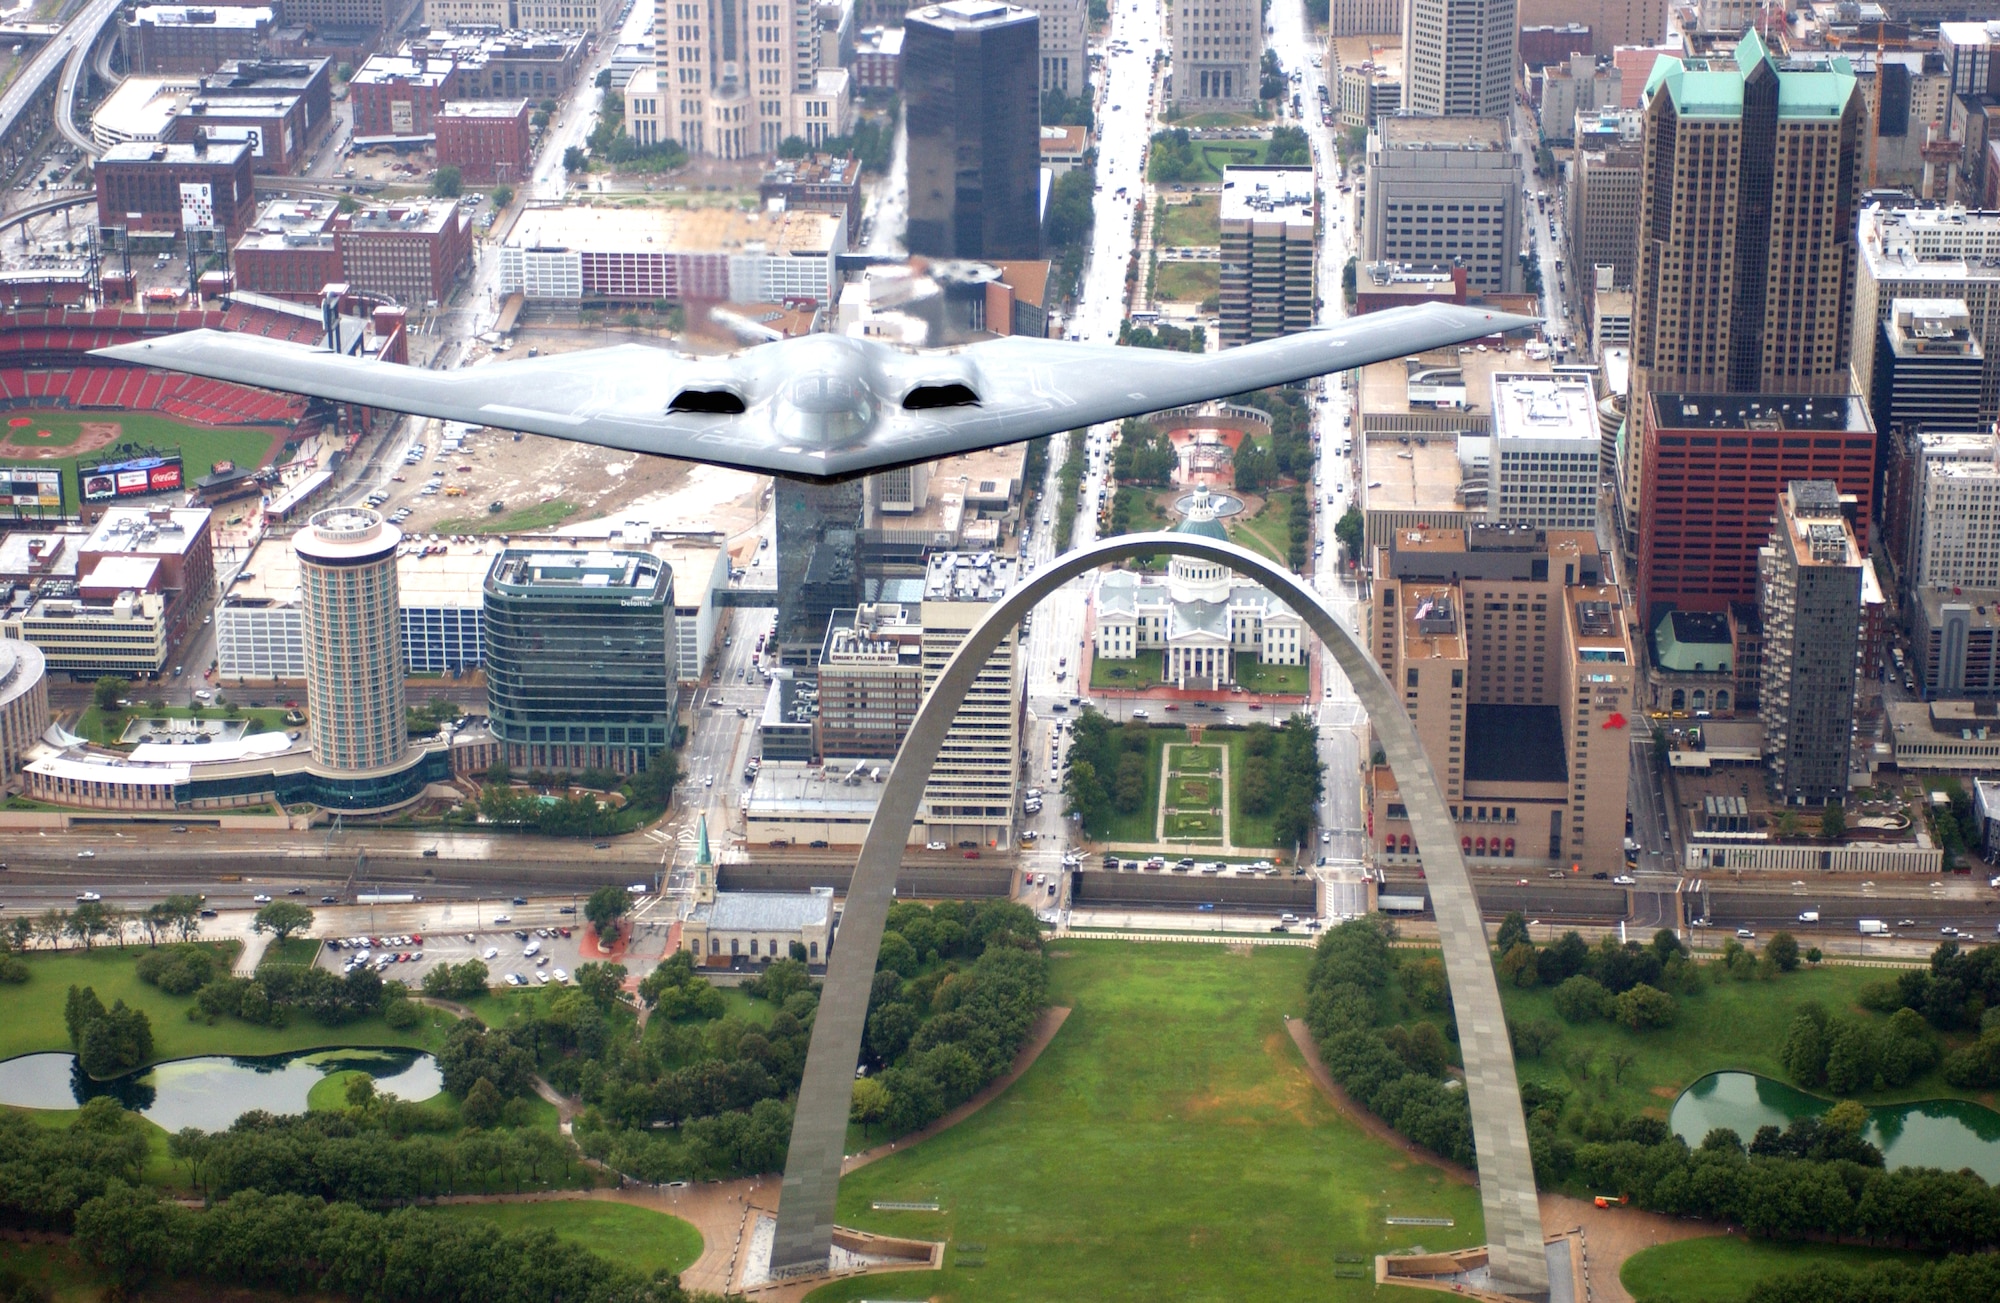 A B-2 Stealth bomber from the 509th Bomb Wing at Whiteman Air Force Base, Mo., flies over the St. Louis Arch on Aug. 10. The B-2 flyover was one of several events celebrating Air Force Week in St. Louis. (U.S. Air Force photo/Tech. Sgt. Justin D. Pyle)